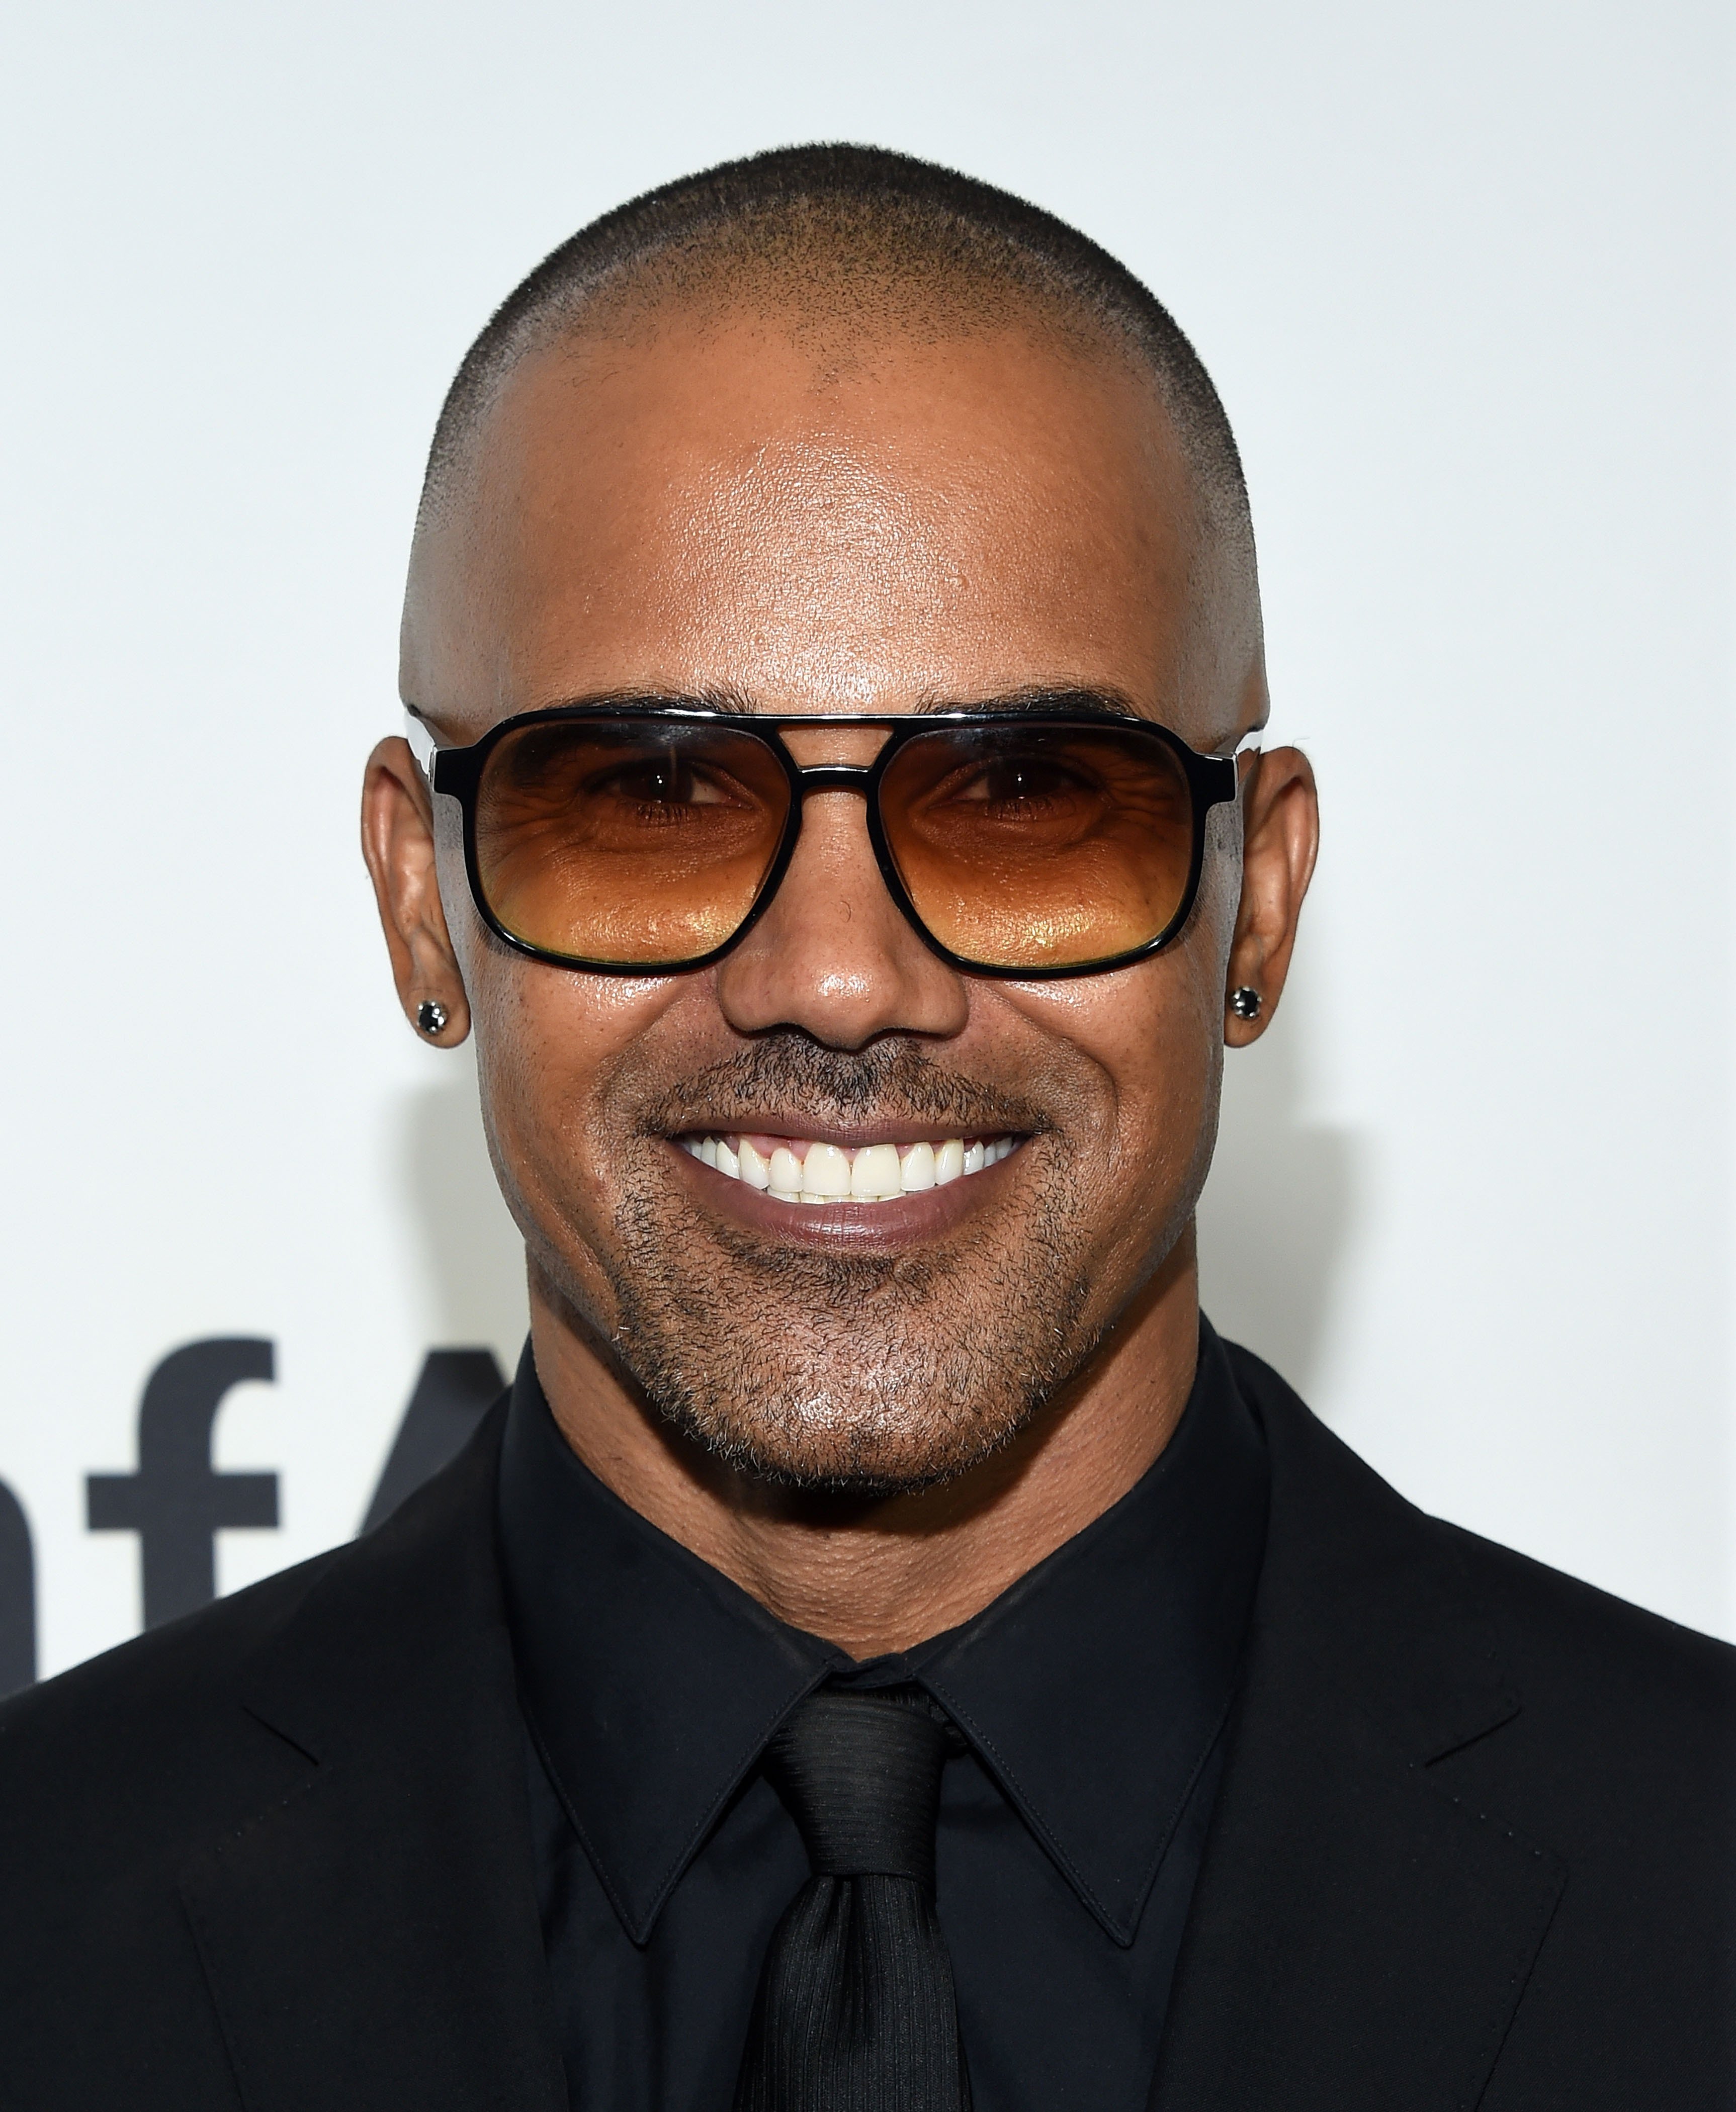 Shemar Moore at amfAR's Inspiration Gala Los Angeles on October 27, 2016 in Hollywood, California | Photo: Getty Images